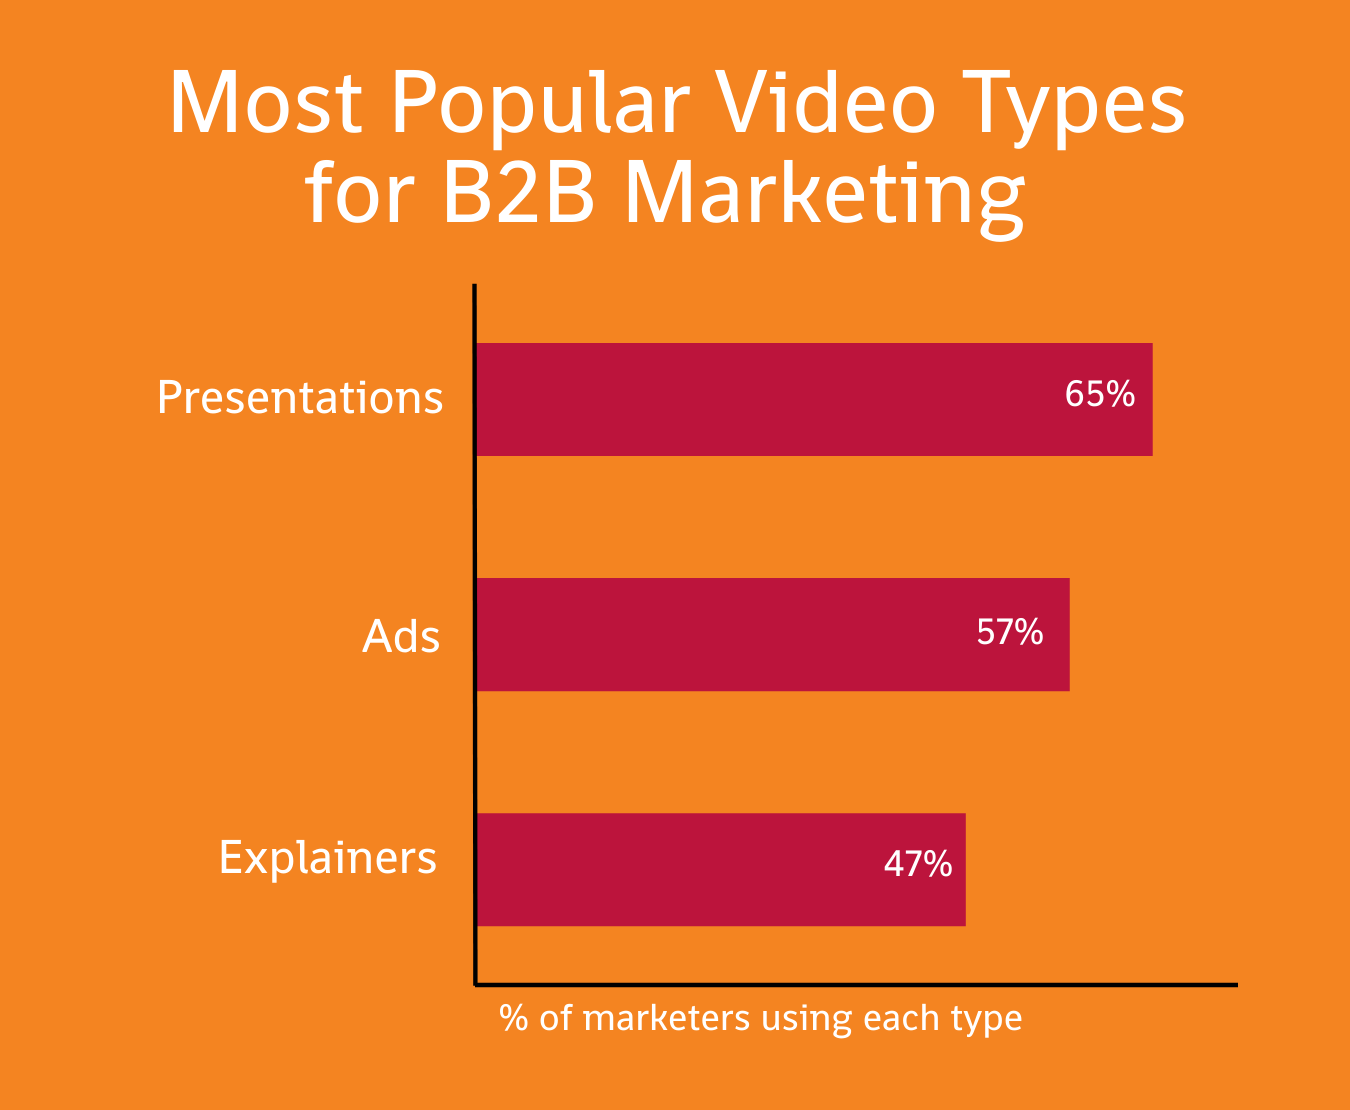 2B Marketing Video Types: The top three are presentations (used by 65% of marketers), ads (used by 57% of marketers), and "explainers" (used by 47% of marketers)